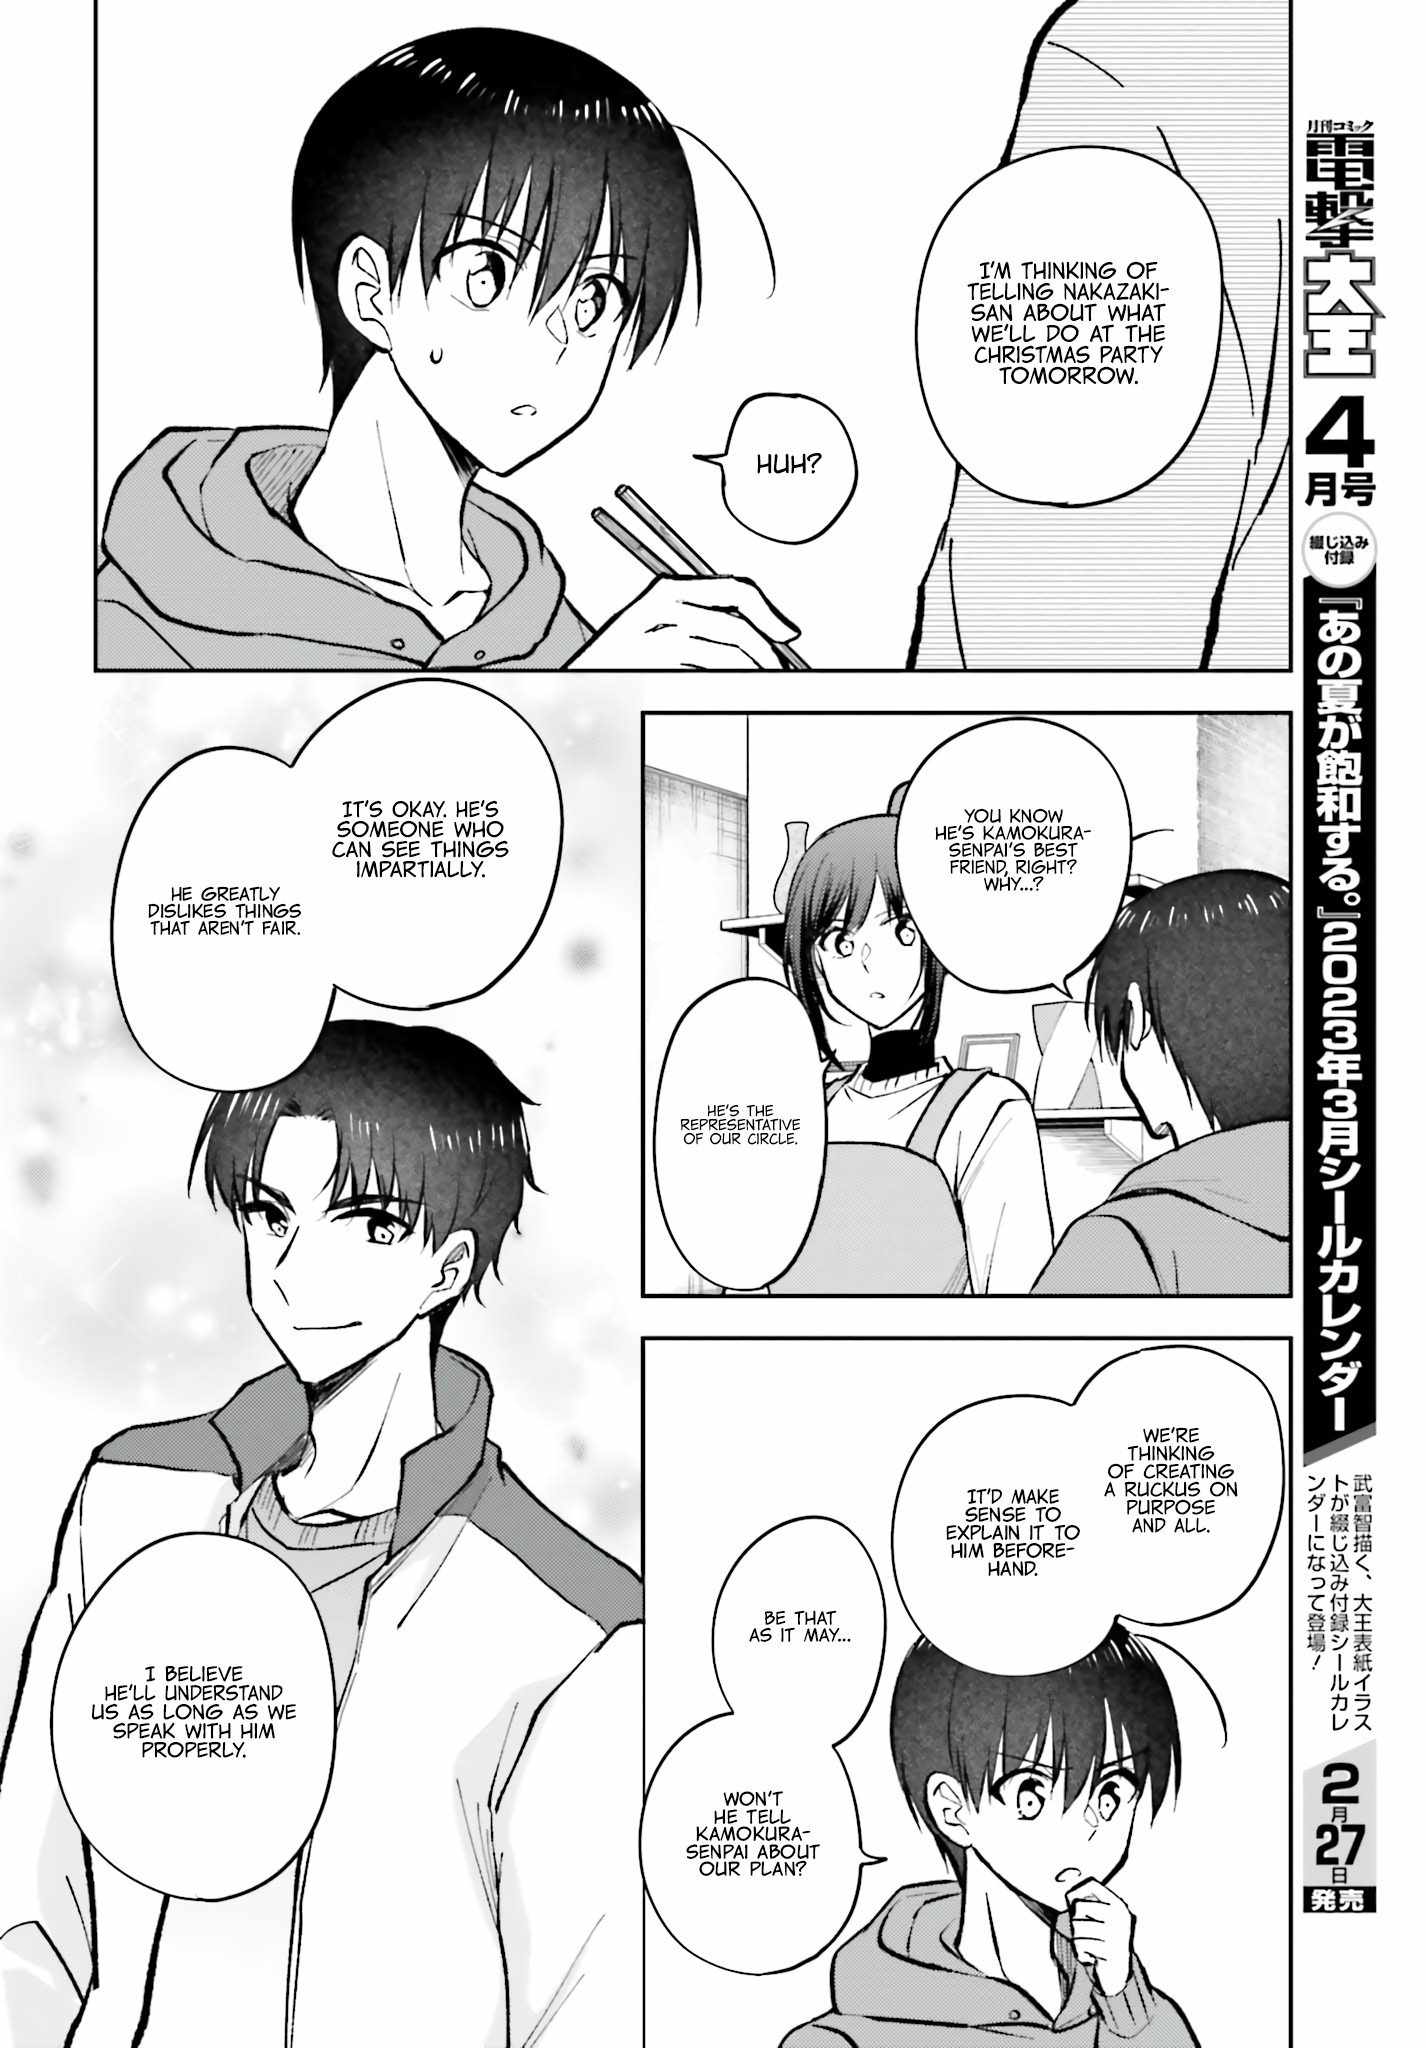 My Girlfriend Cheated on Me With a Senior, so I’m Cheating on Her With His Girlfriend Chapter 13-eng-li - Page 16